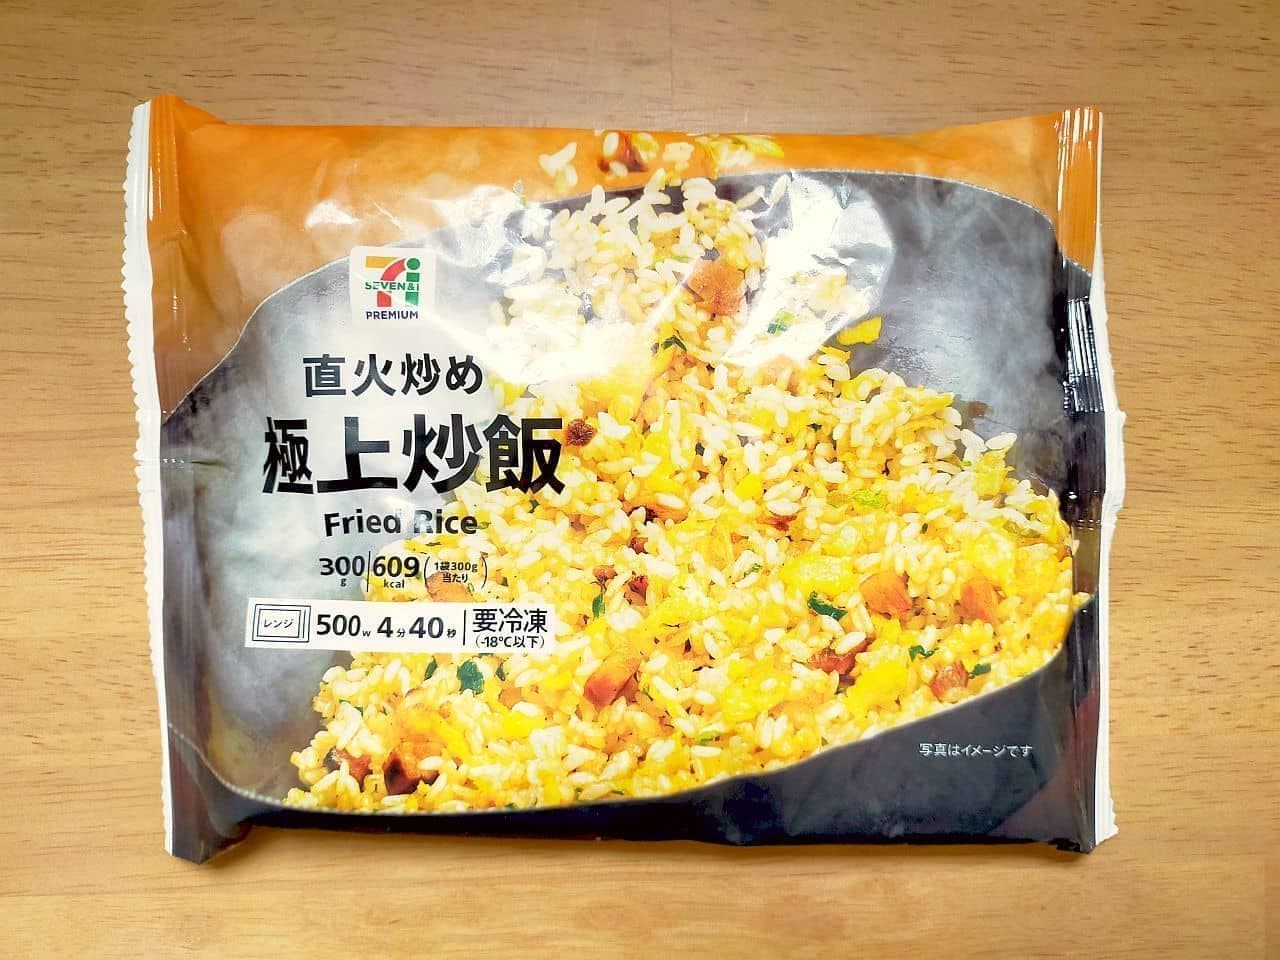 Eat and compare 7-Premium frozen fried rice